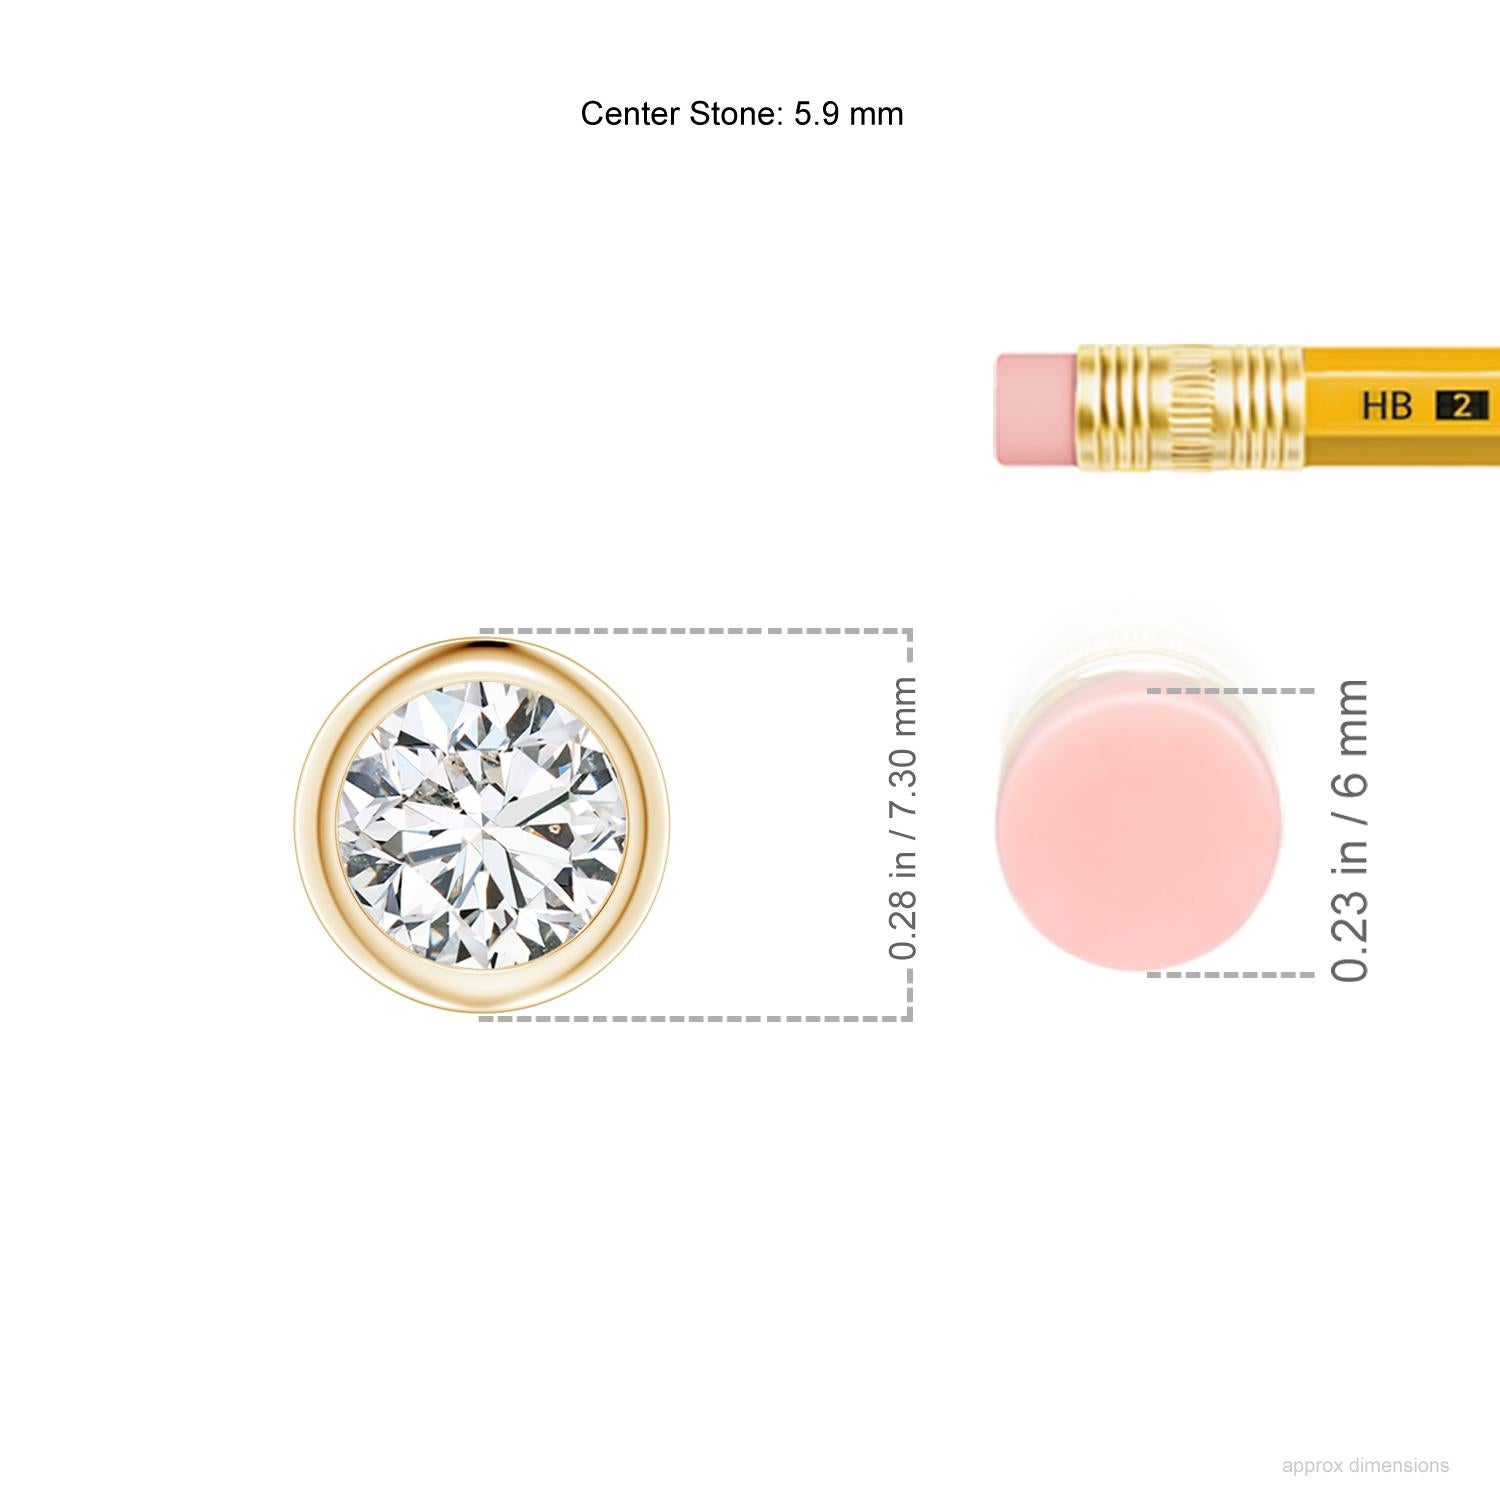 This classic solitaire diamond pendant's beautiful design makes the center stone appear like it's floating on the chain. The sparkling diamond is secured in a bezel setting. Crafted in 14k yellow gold, this round diamond pendant makes an elegant